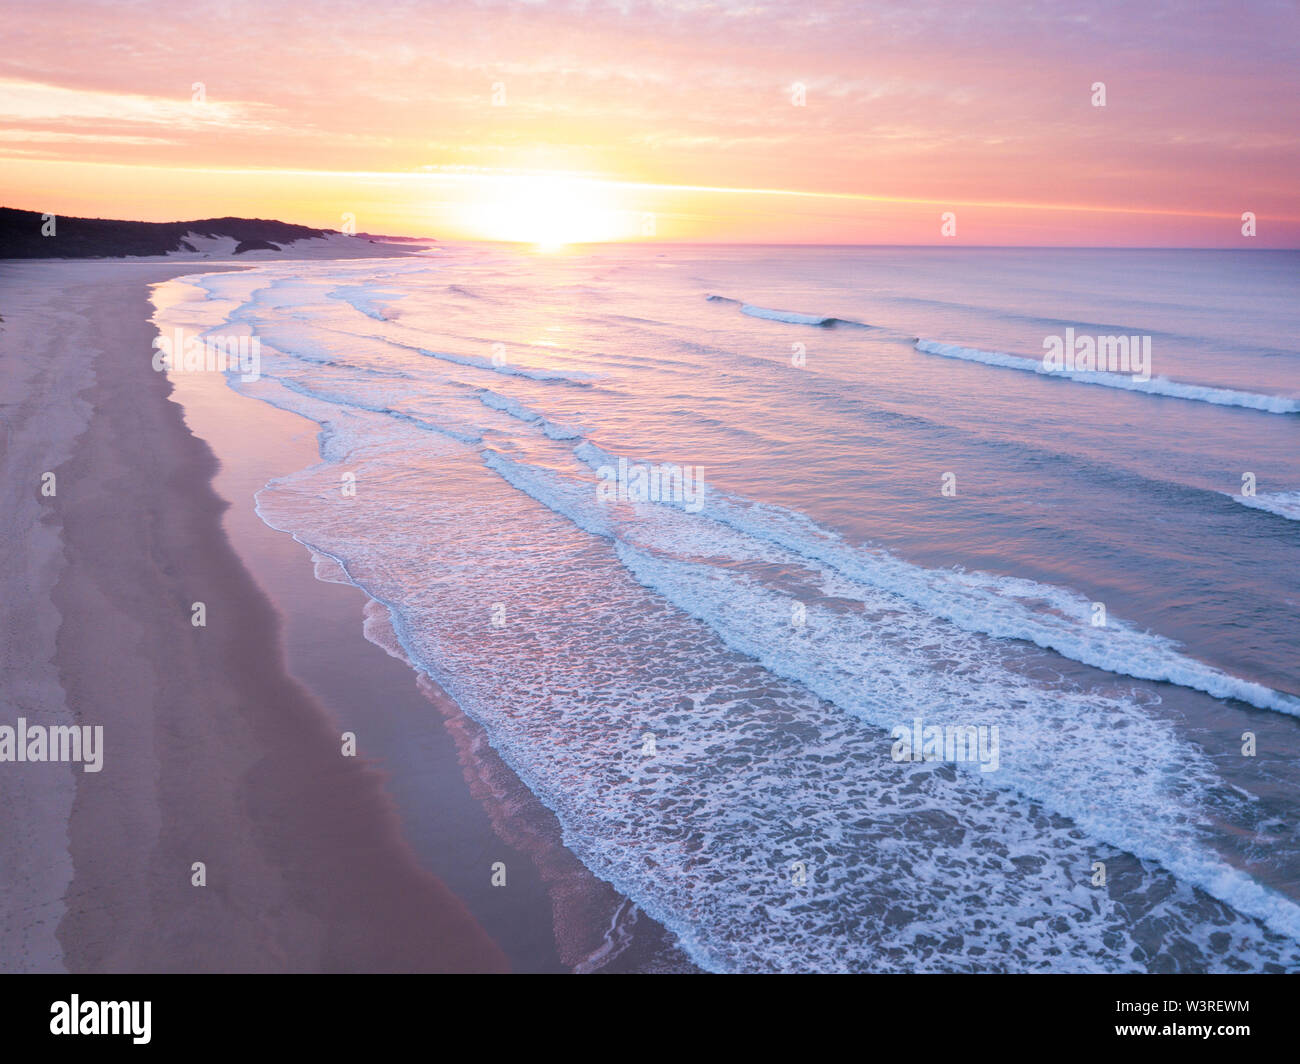 Aerial view over a wide open ocean and beach at sunrise Stock Photo